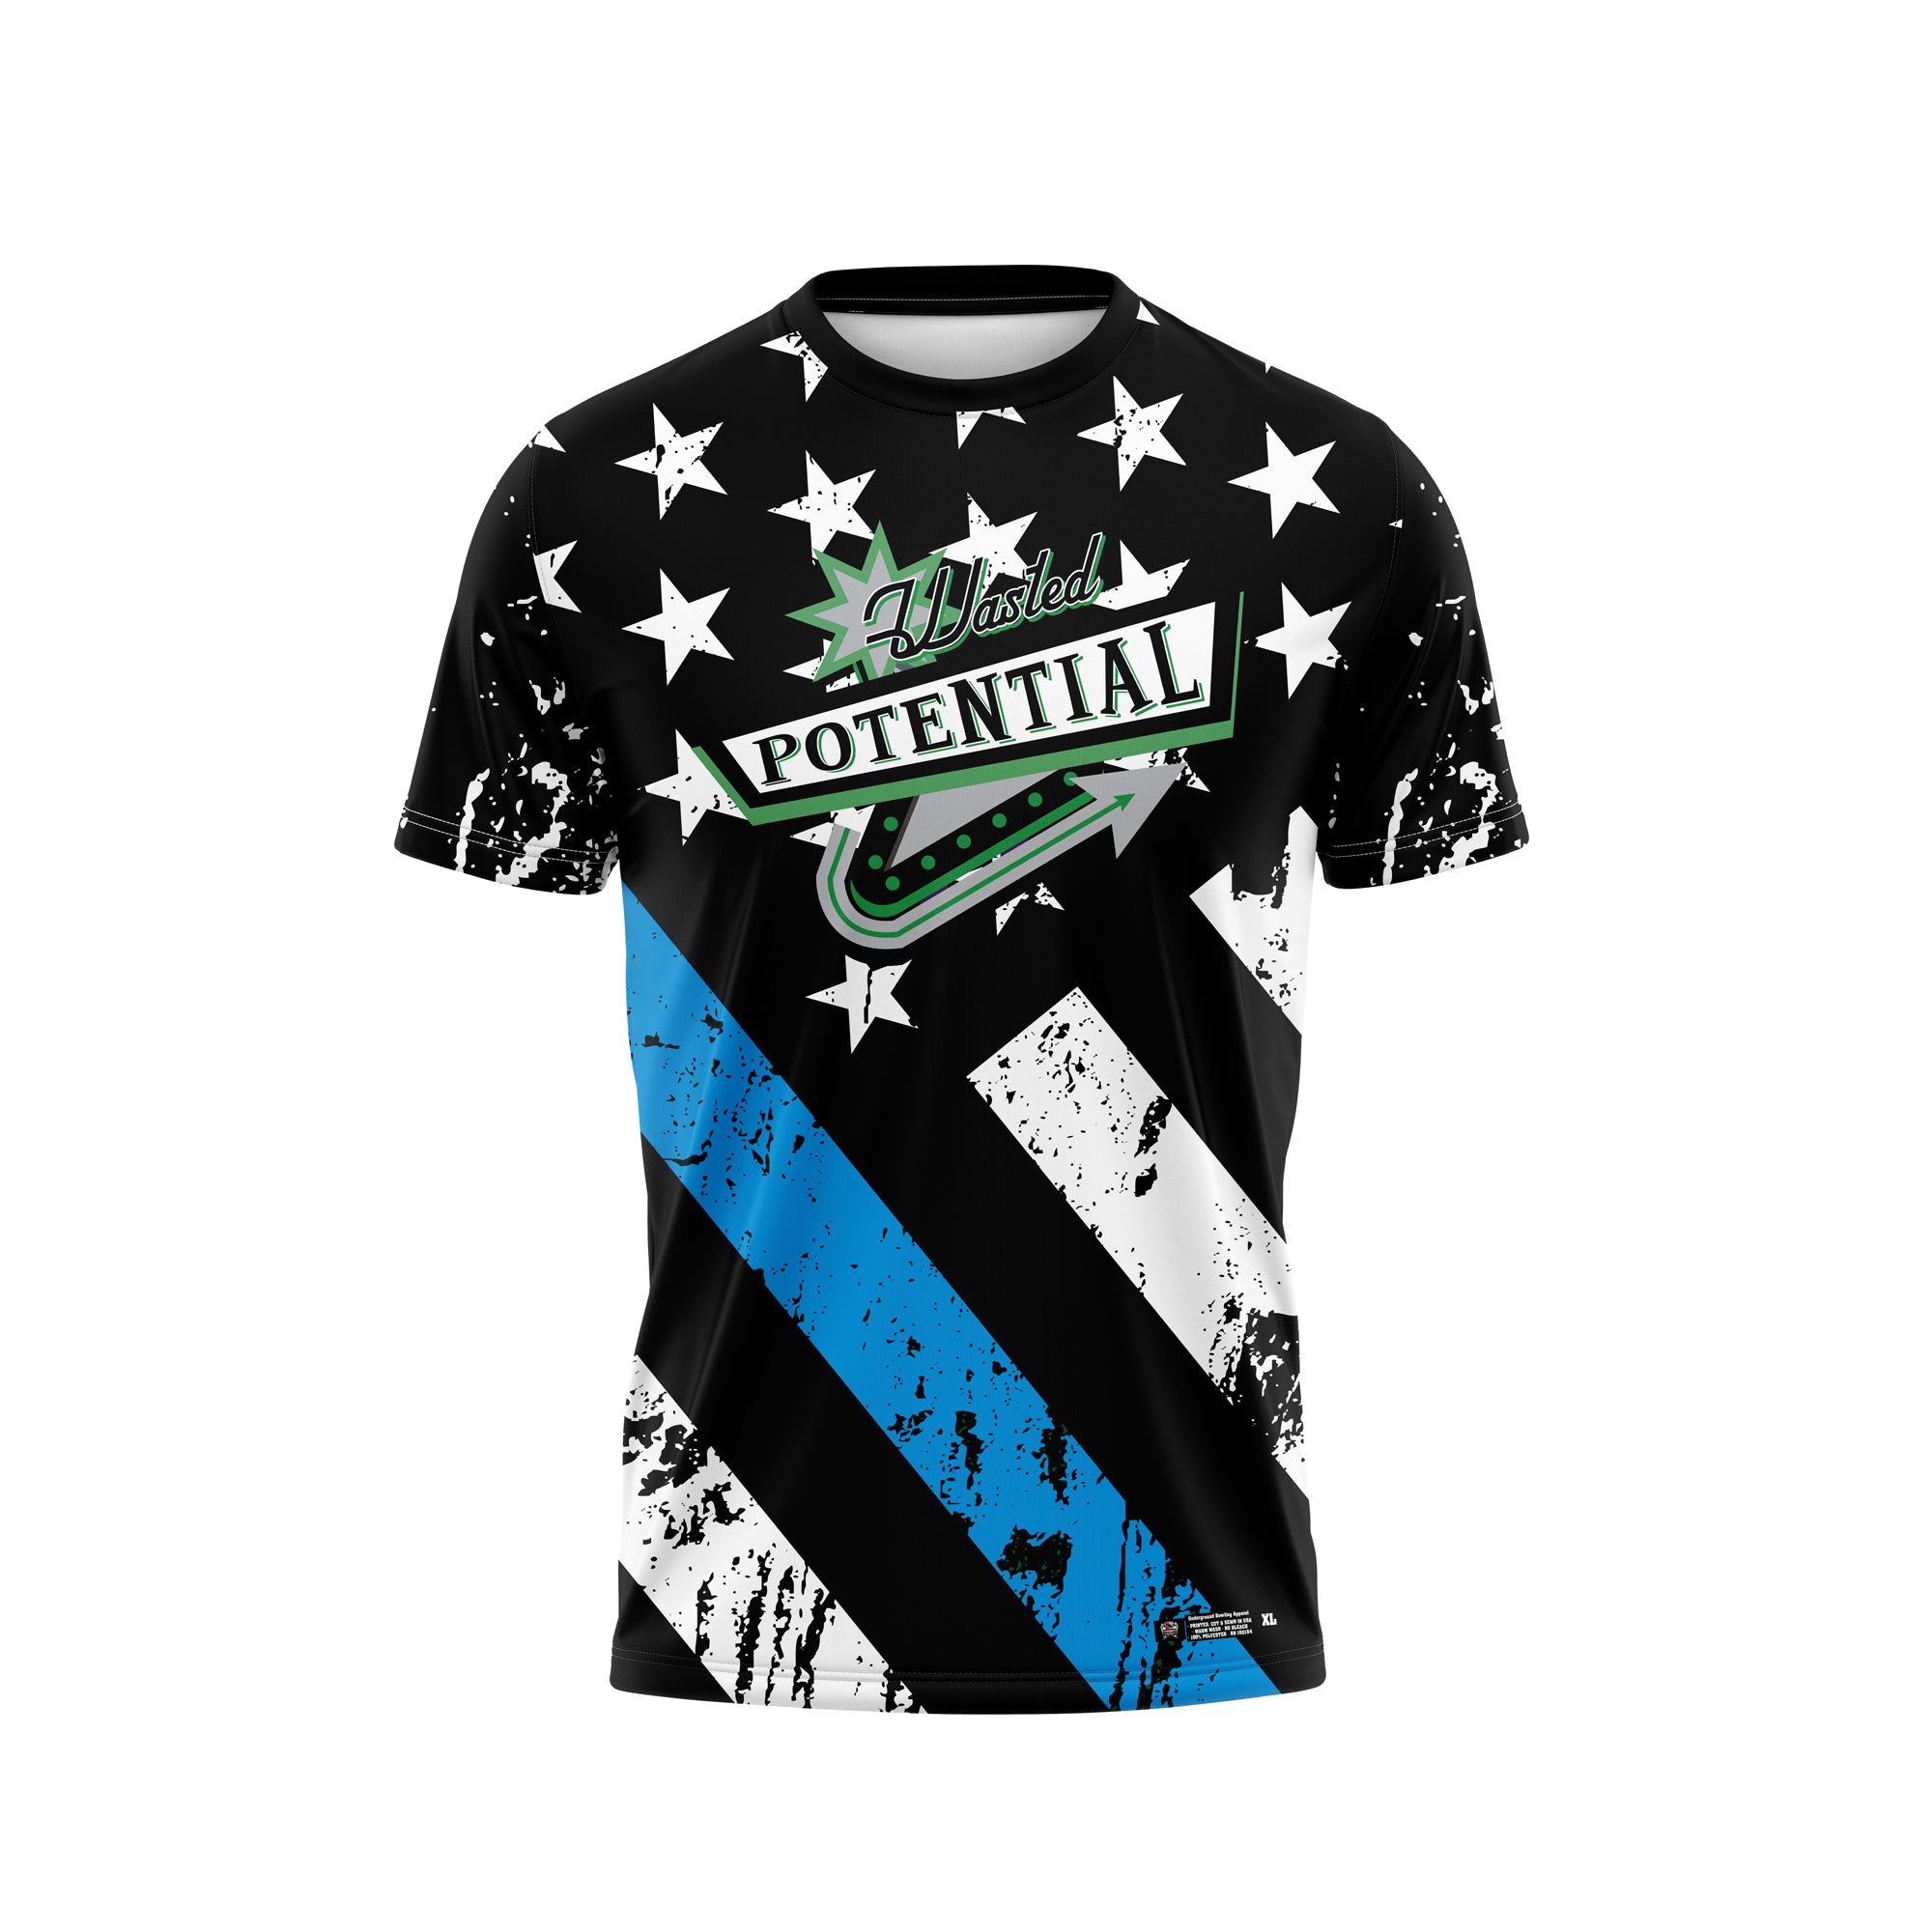 Wasted Potential Flag Jersey